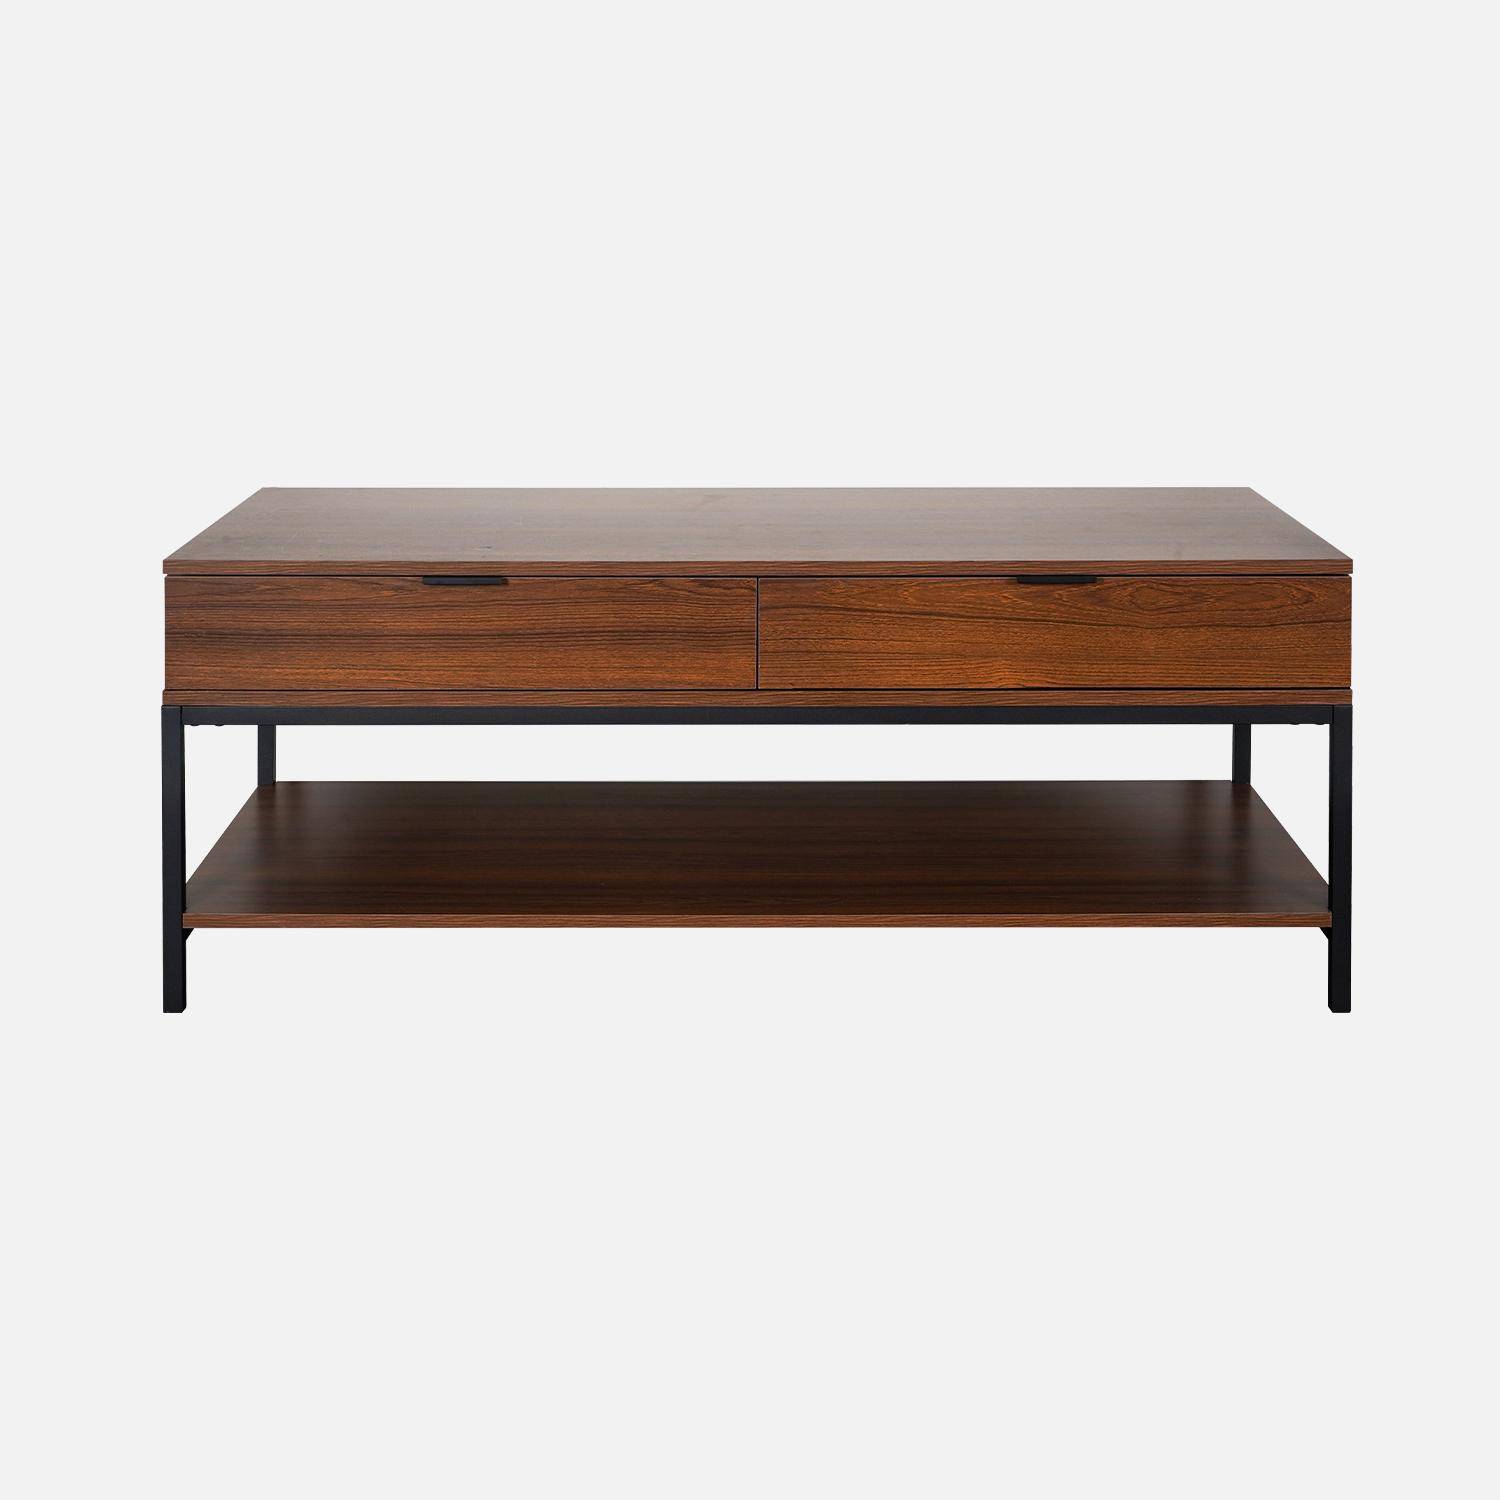 Walnut-coloured coffee table with black metal legs and handle - 2 drawers and 1 shelf Photo5